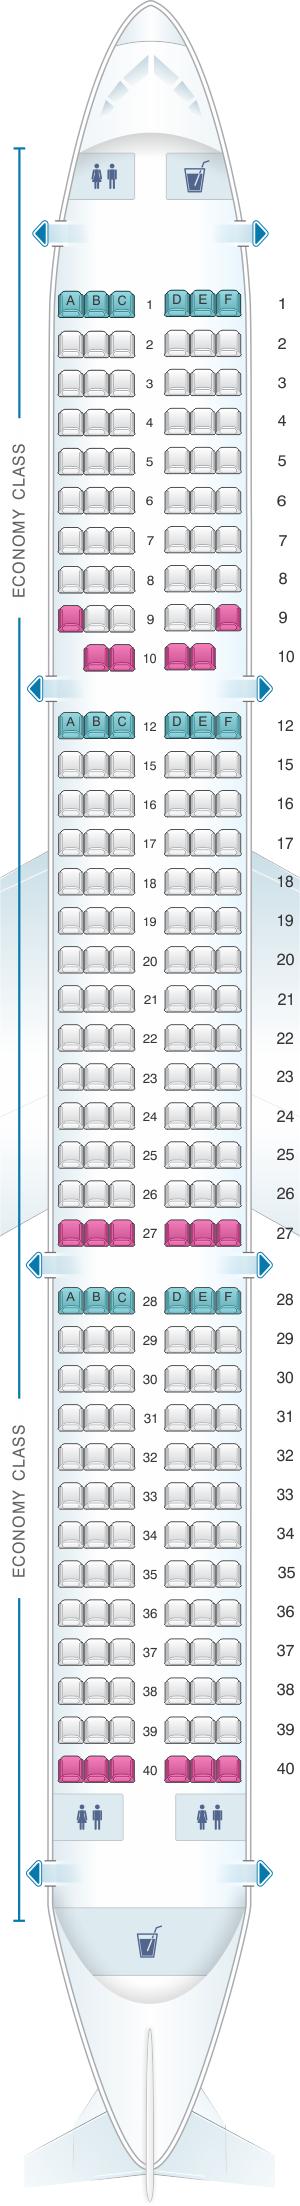 Seat Map Vueling Airbus A321 | SeatMaestro